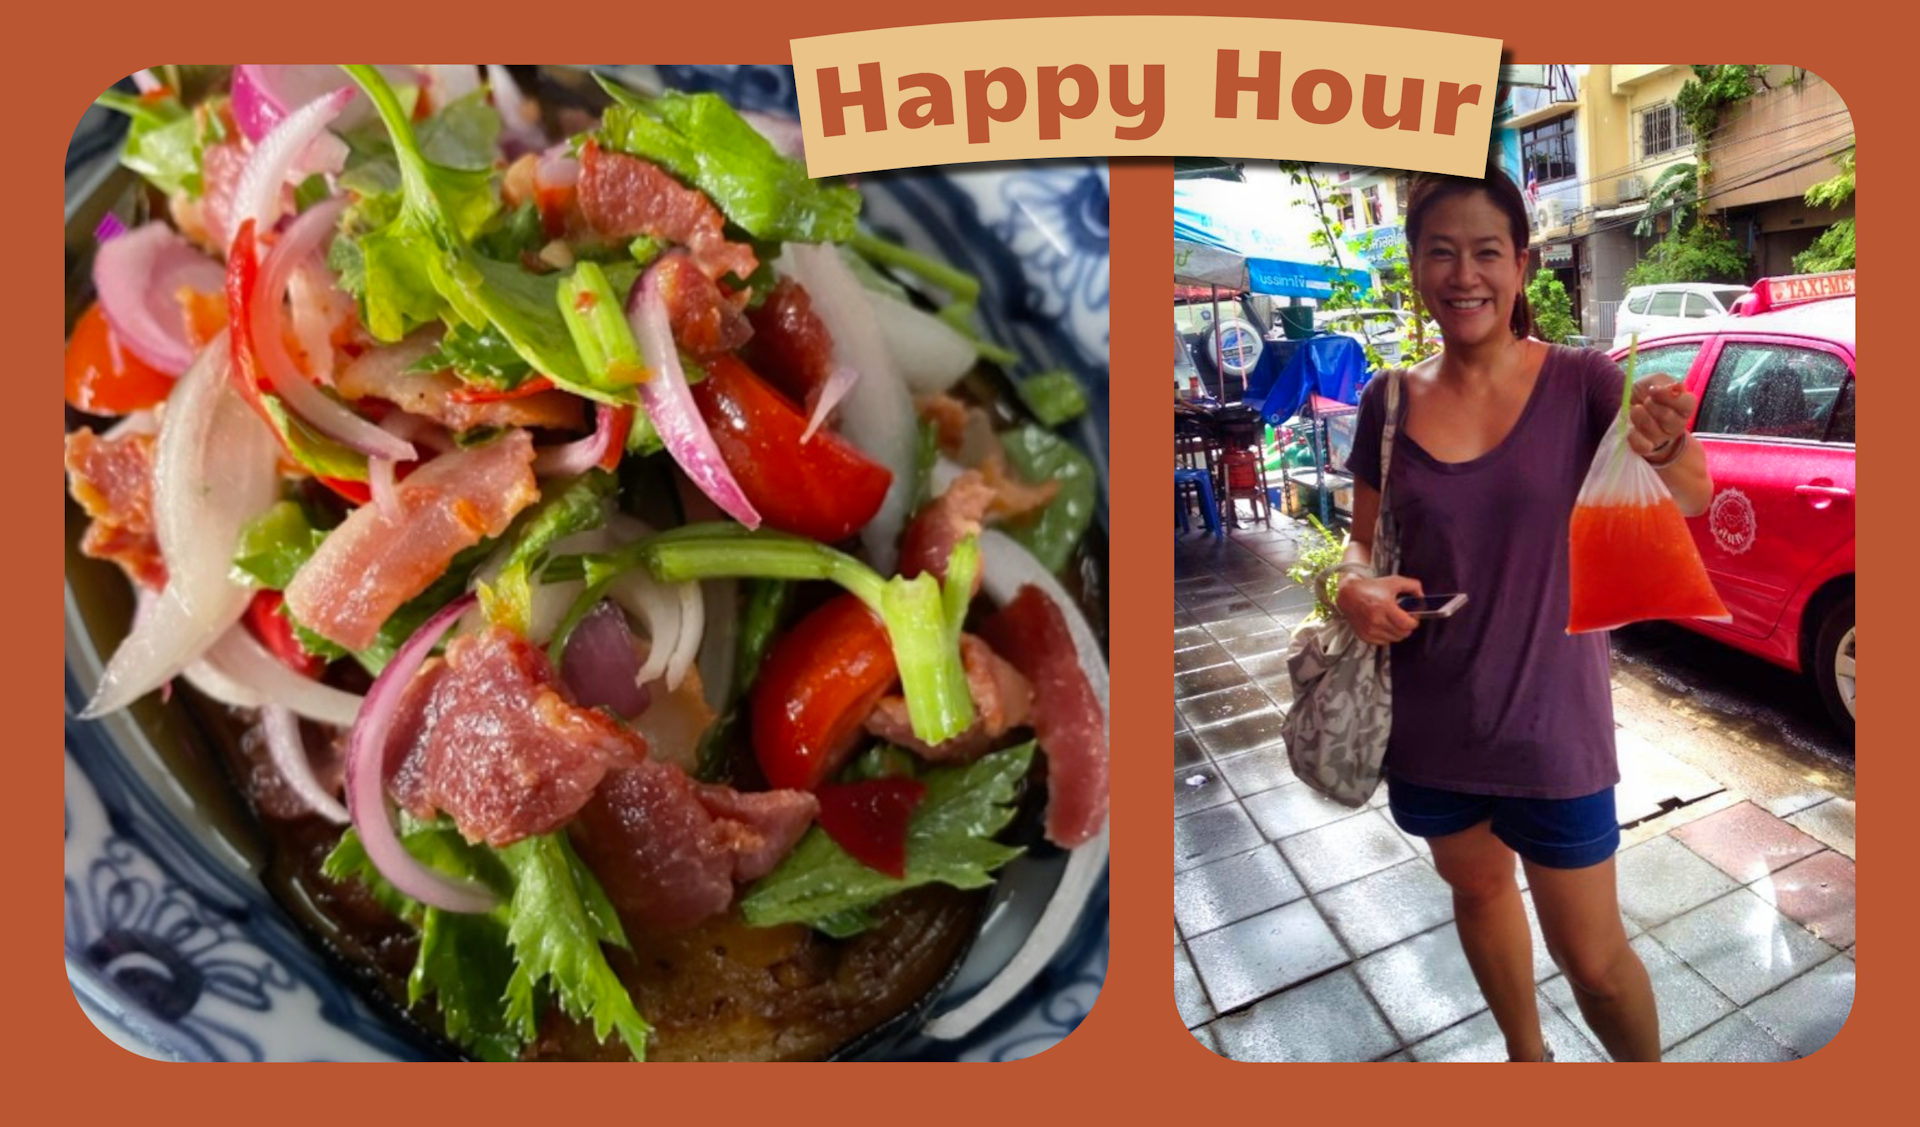 L: A Thai salad with beef on a plate. R: A smiling woman holds a plastic bag of juice on a Bangkok street